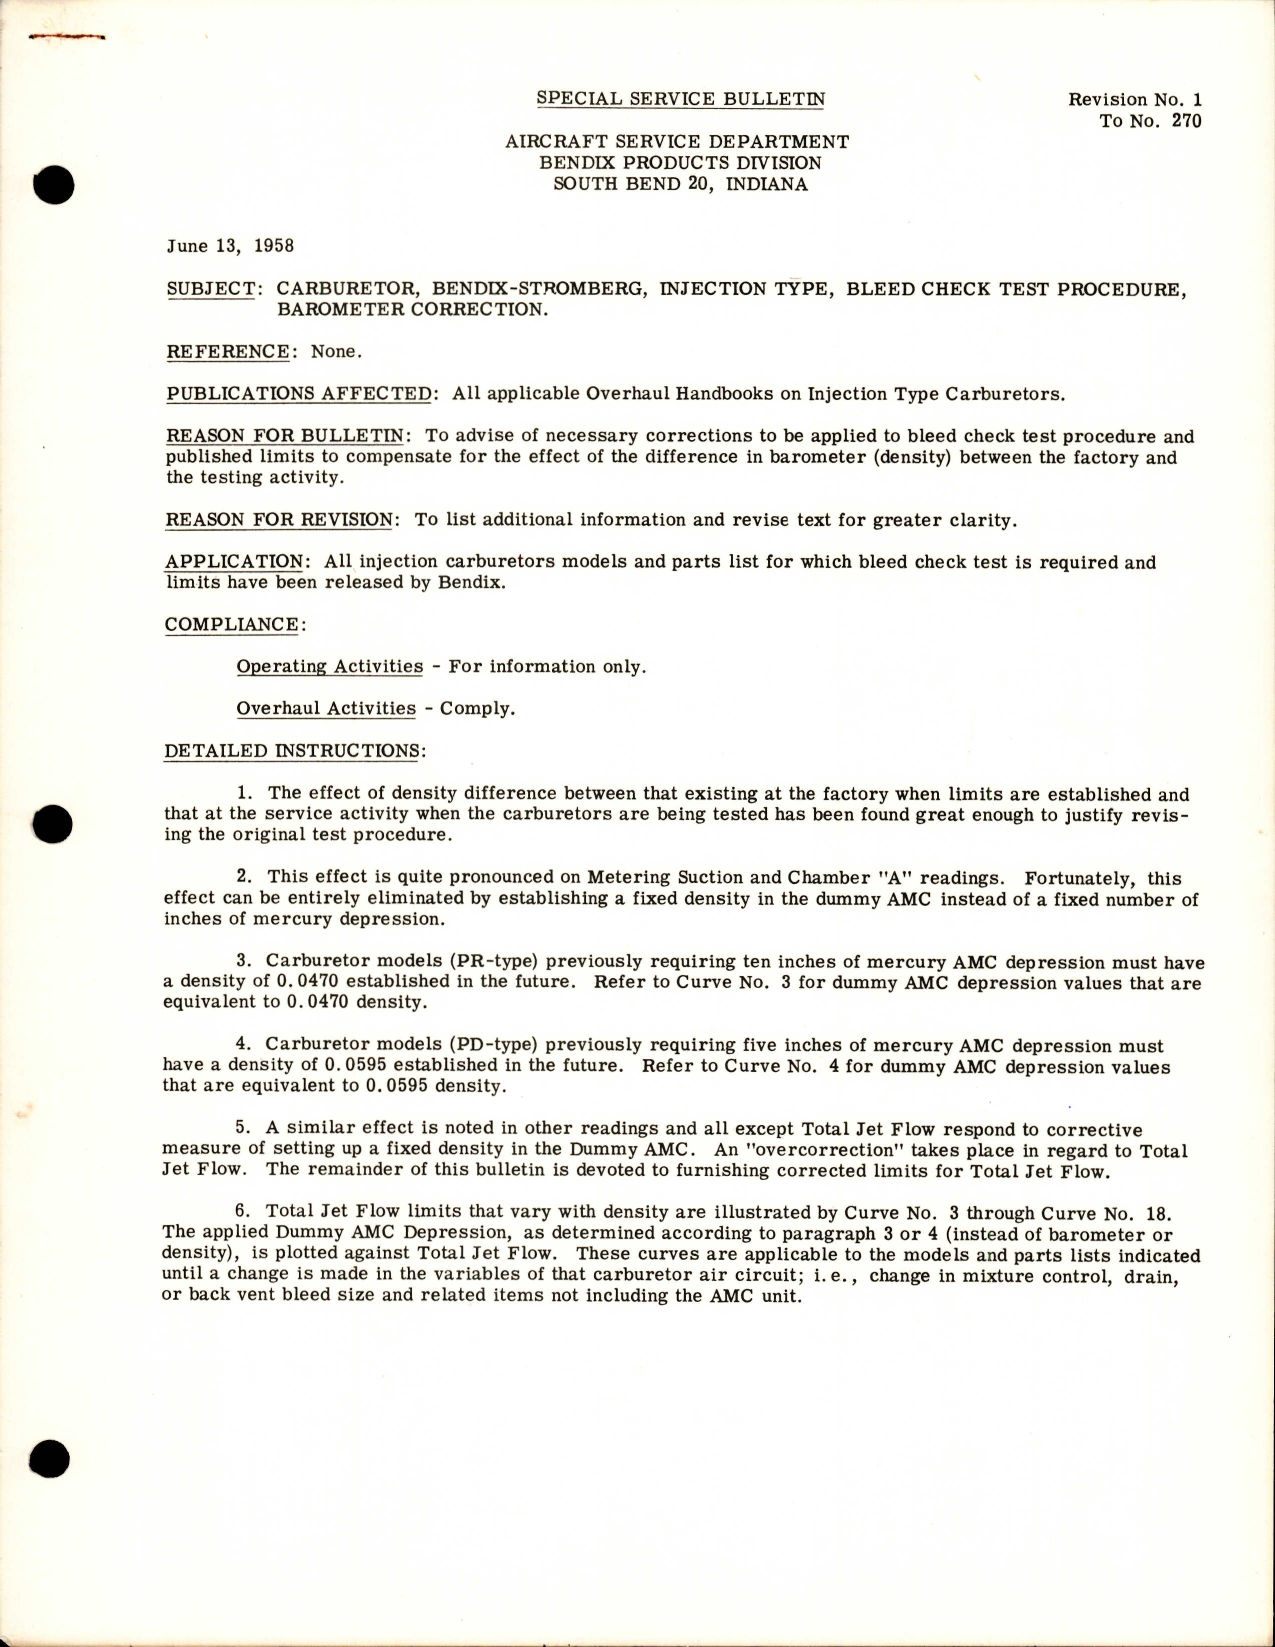 Sample page 1 from AirCorps Library document: Carburetor, Bendix Stromberg, Injection Type, Bleed Check Test Procedure, Barometer Correction